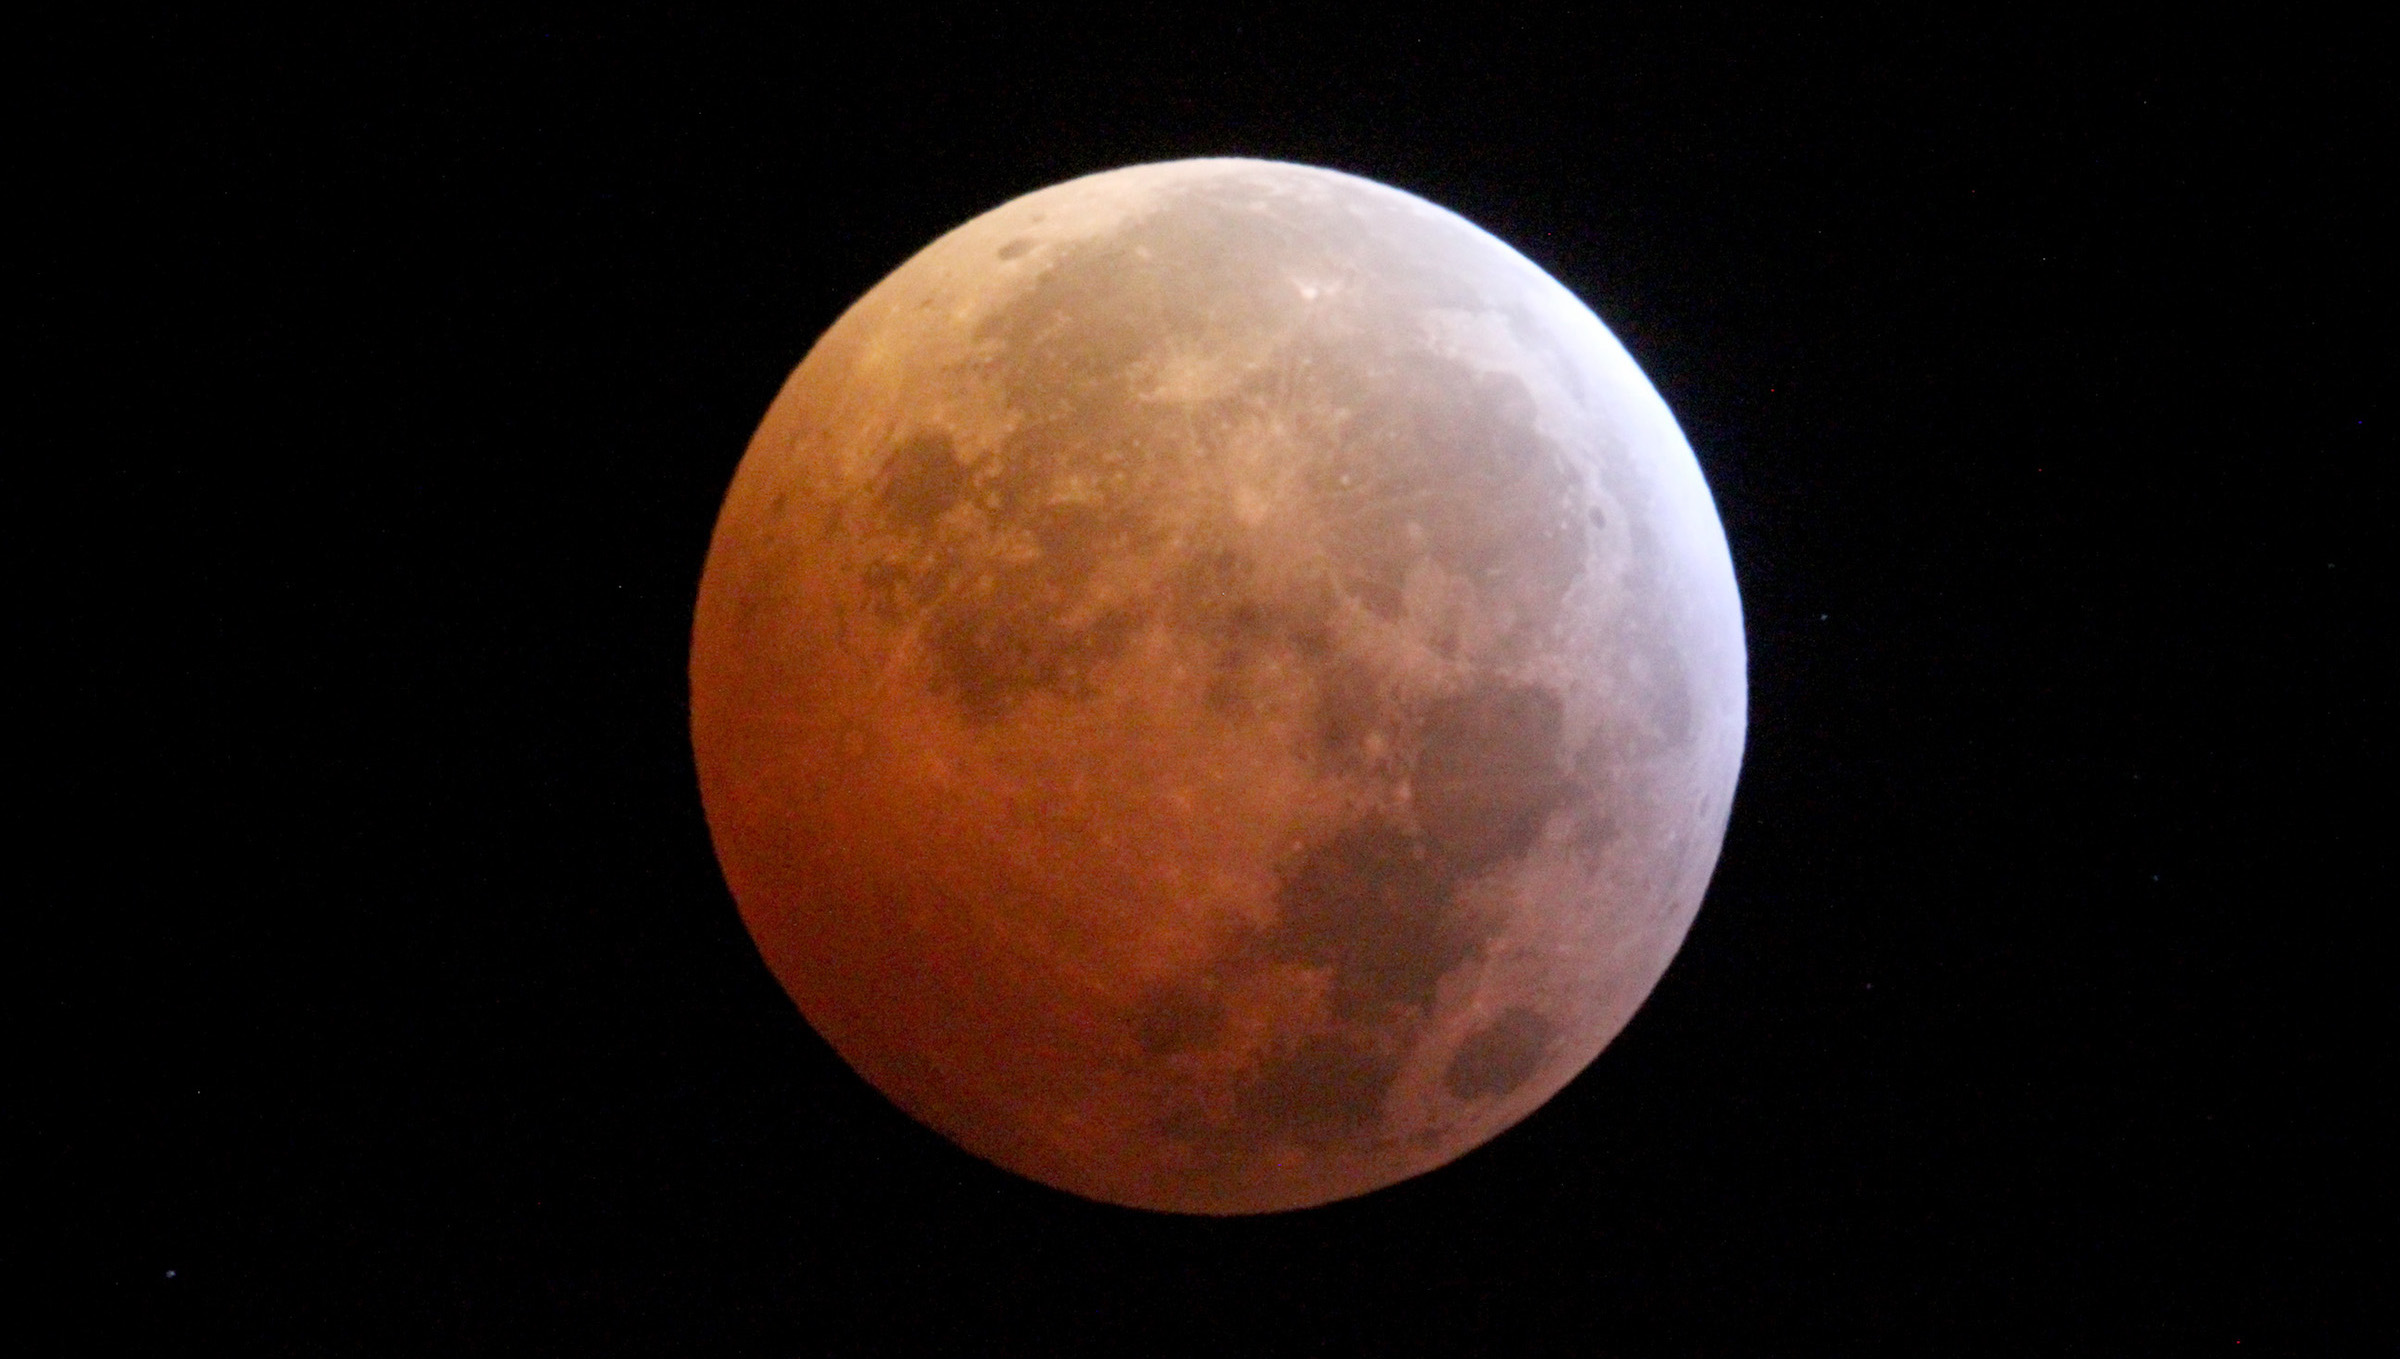 The moon appears red during a total lunar eclipse